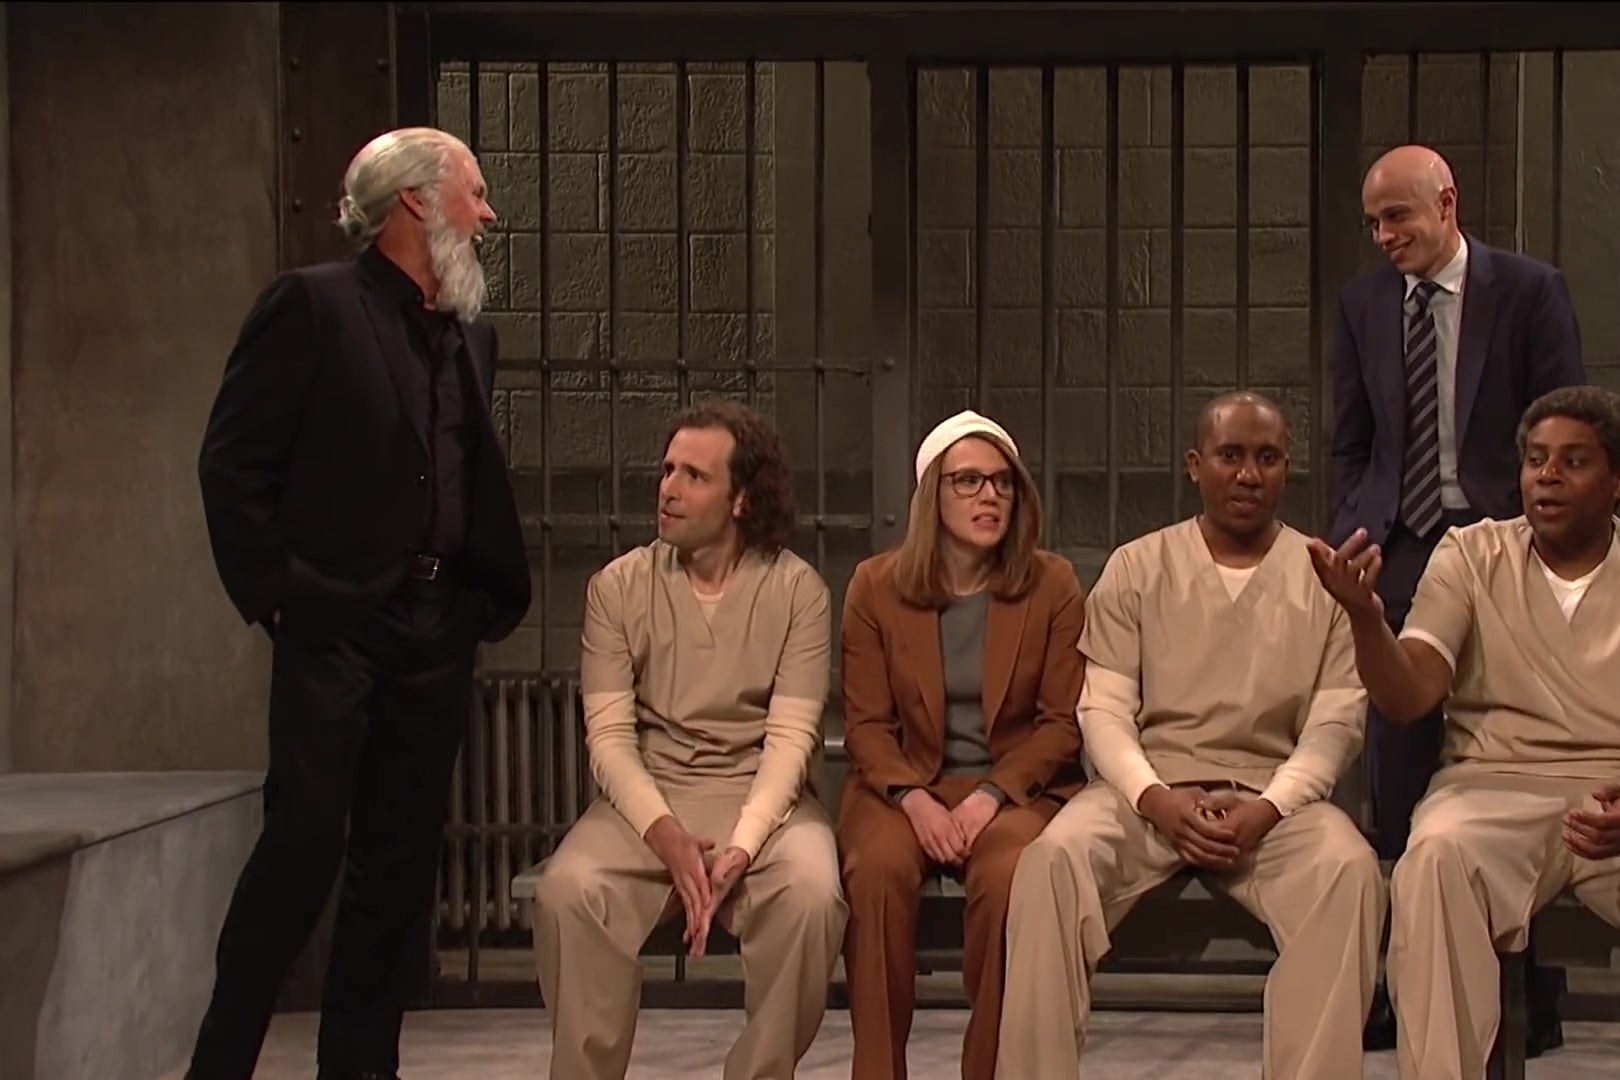 Michael Keaton, as Julian Assange, brags to Kate McKinnon's Lori Loughlin, Pete Davidson's Michael Avenatti, and inmates played by Kyle Mooney, Chris Redd, and Kenan Thompson in a still from SNL.